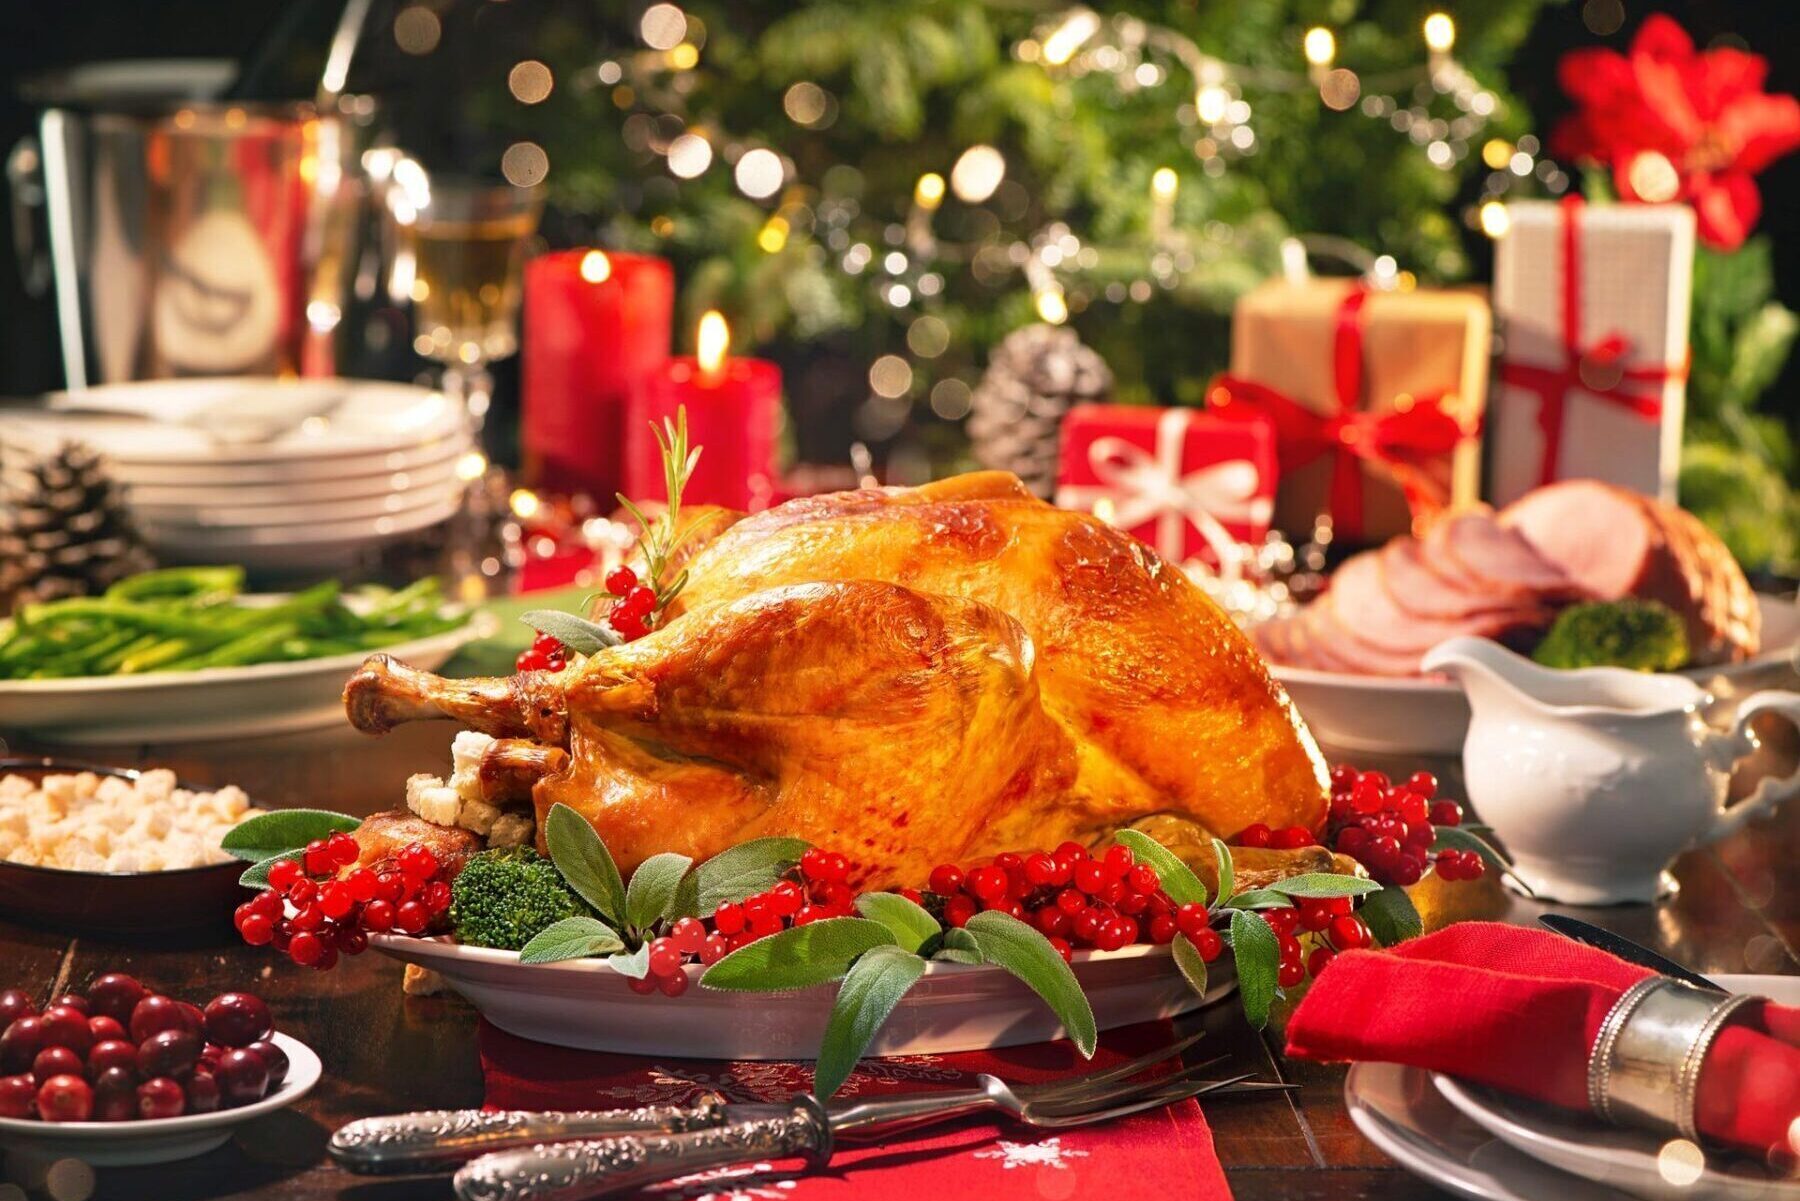 Orange County Holiday Catering Services Holiday Catering Orange County - image of christmas turkey dinner